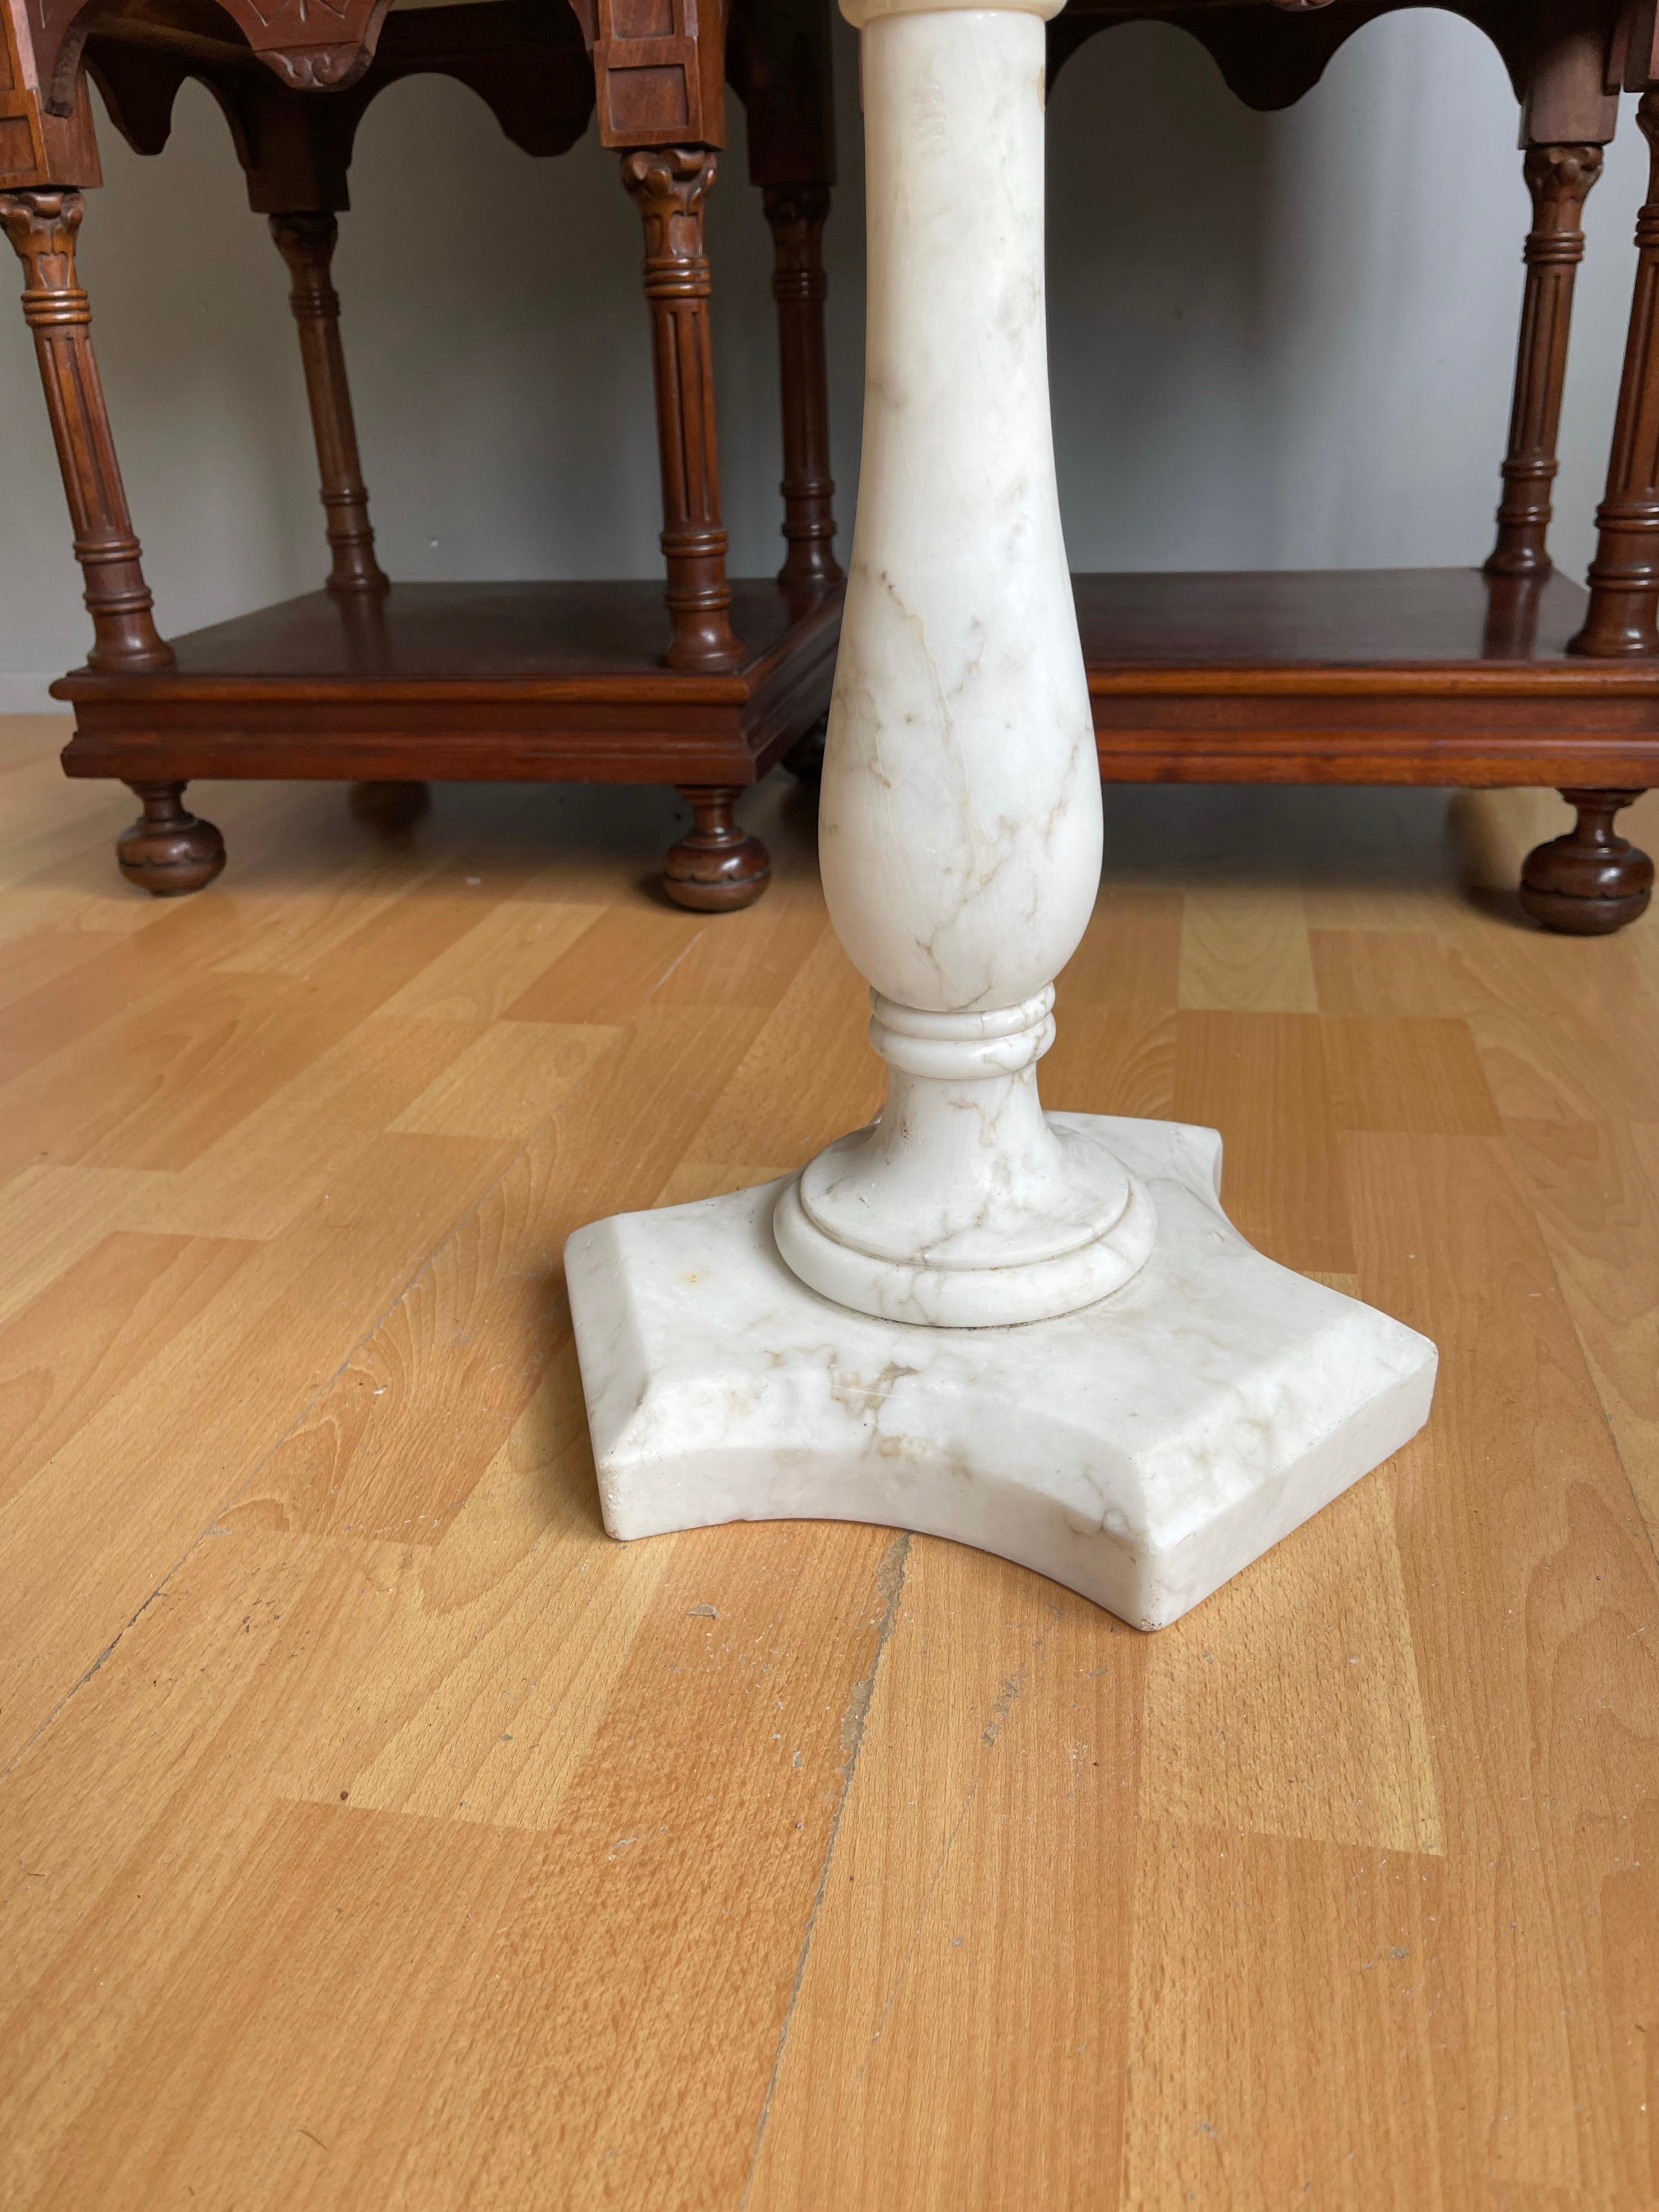 Italian Design Midcentury Modern White Carrara Marble Pedestal Stand / End Table For Sale 1